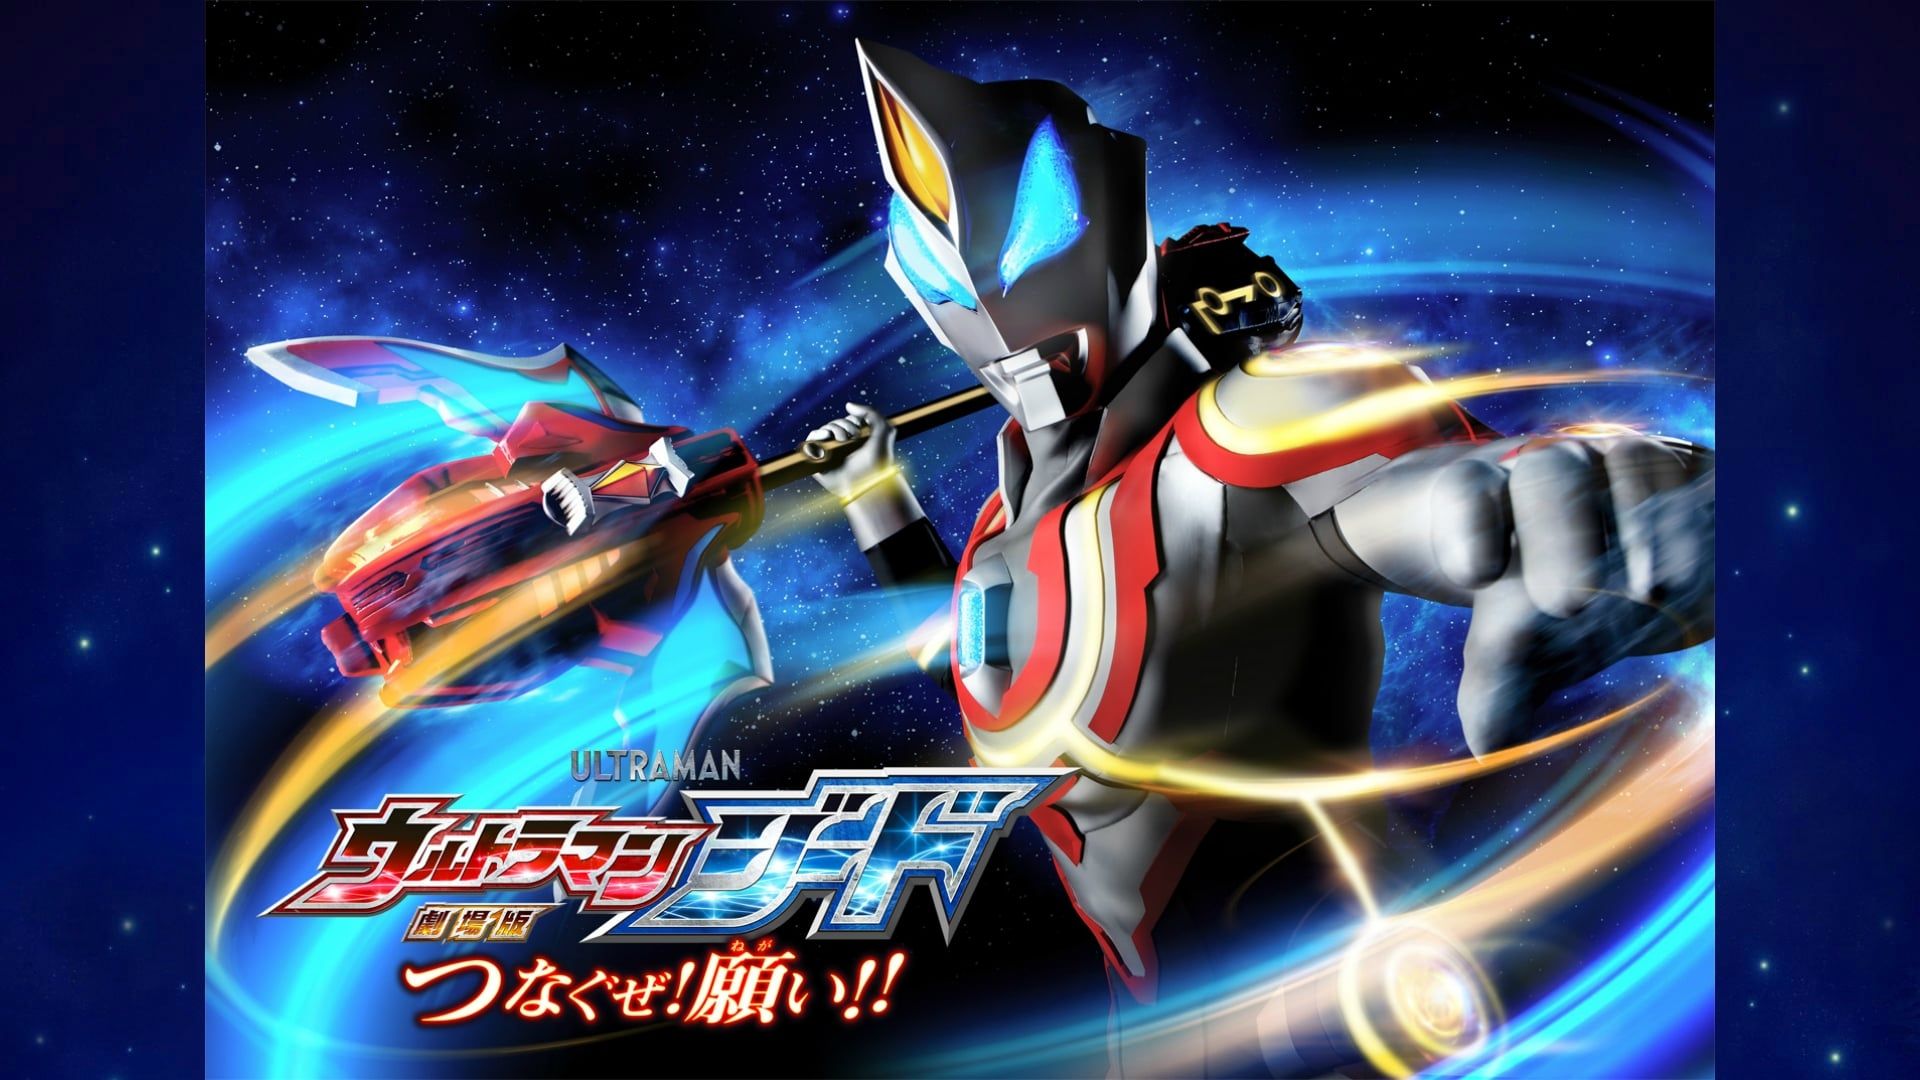 Ultraman Geed: Connect the Wishes! background